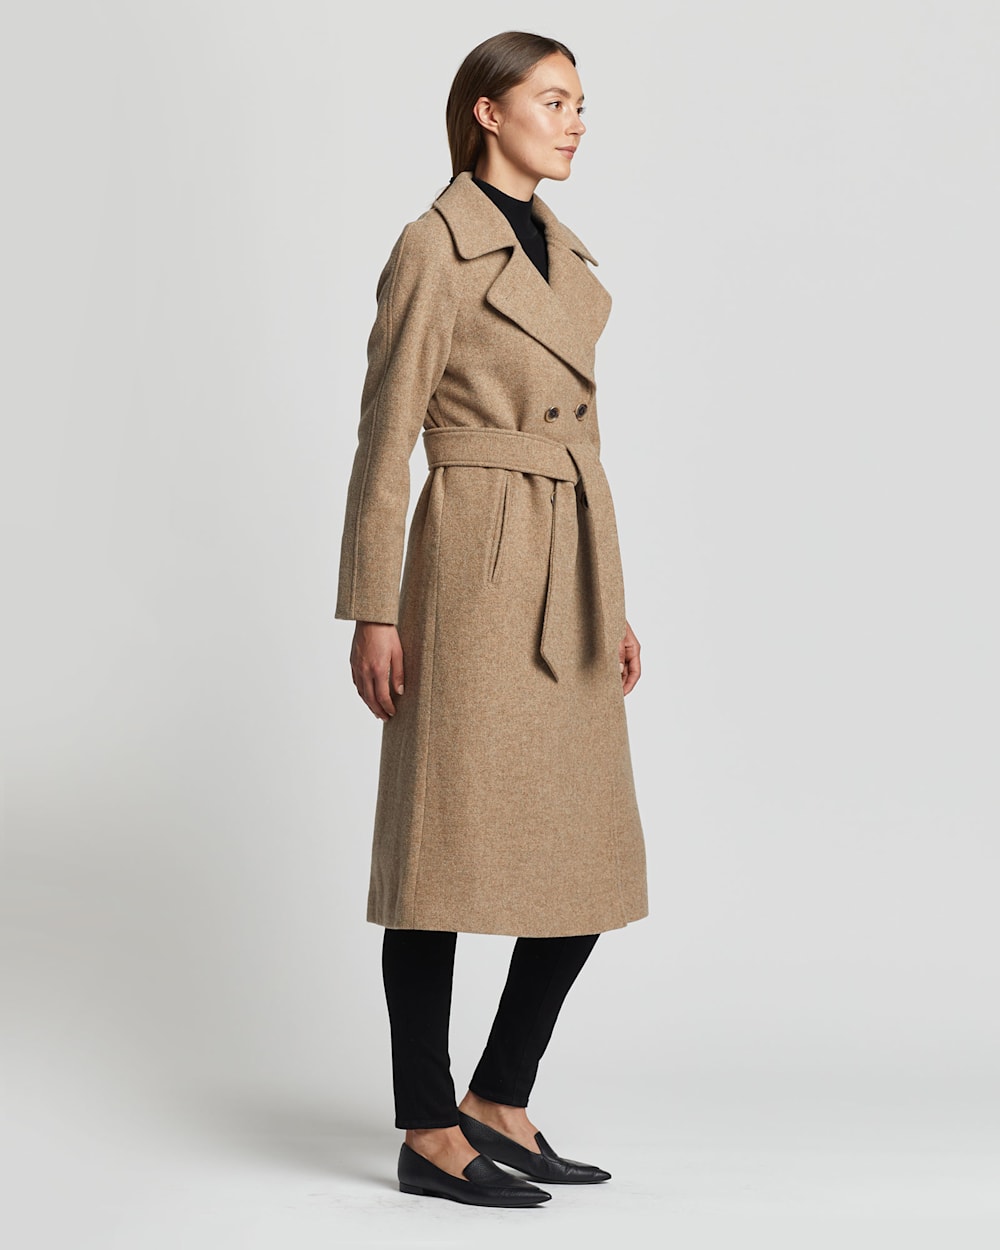 ALTERNATE VIEW OF WOMEN'S UPTOWN LONG WOOL COAT IN WHEAT image number 2